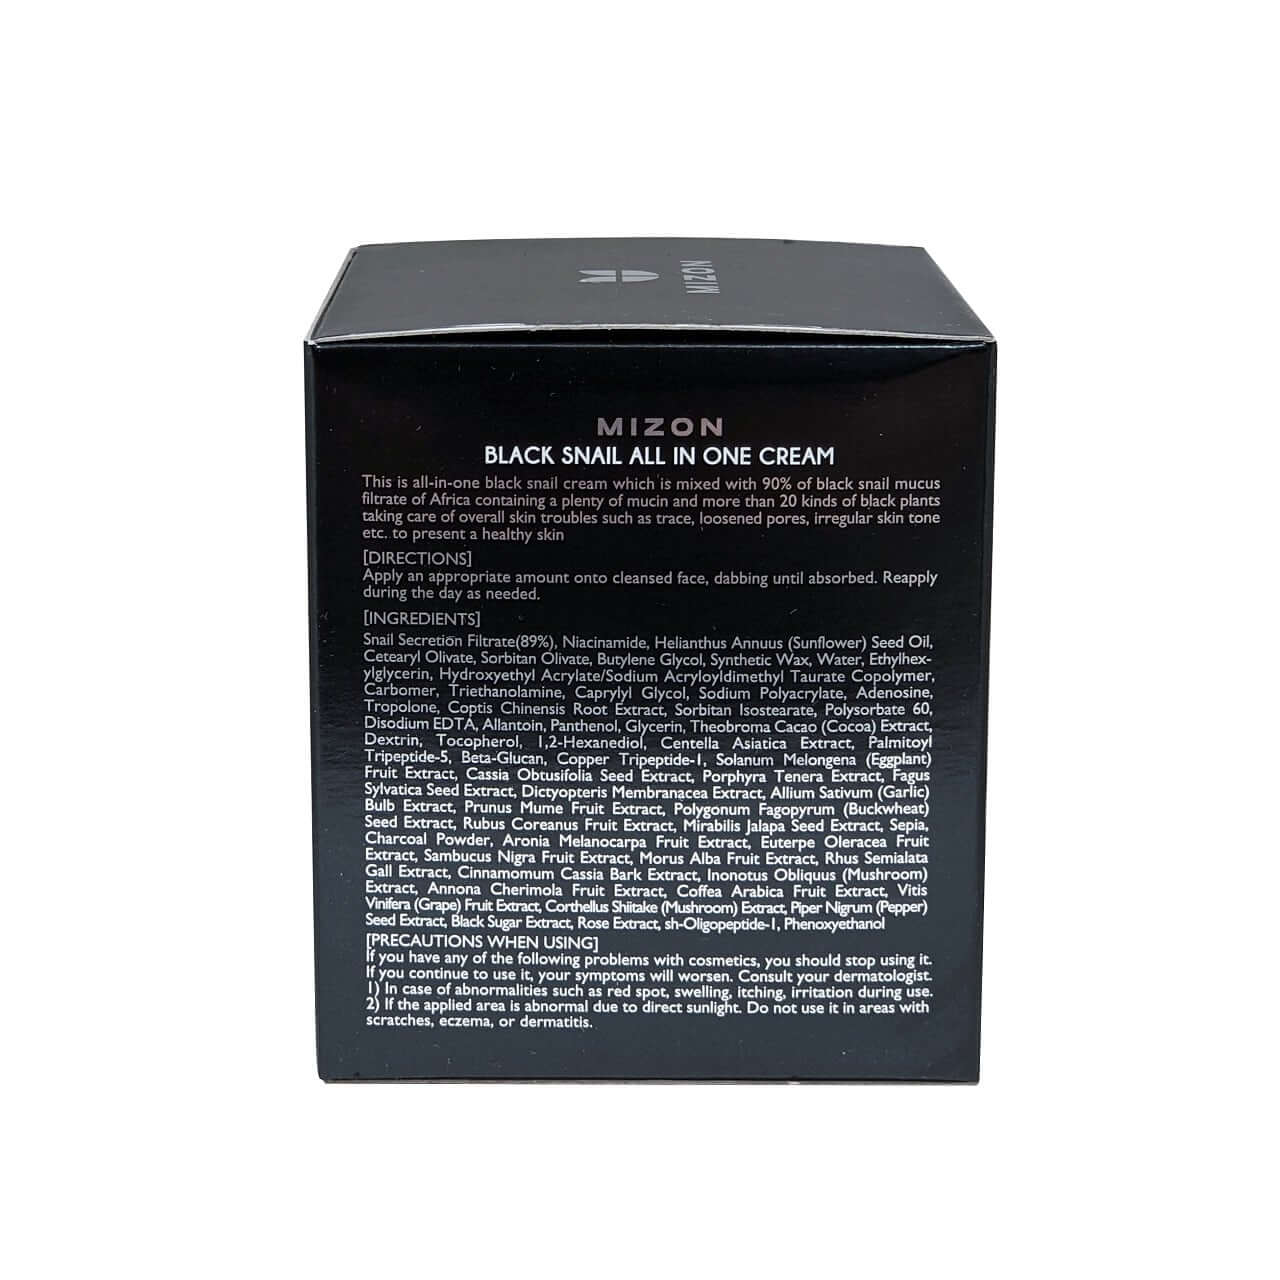 Directions, ingredients, and caution for Mizon Black Snail All In One Cream